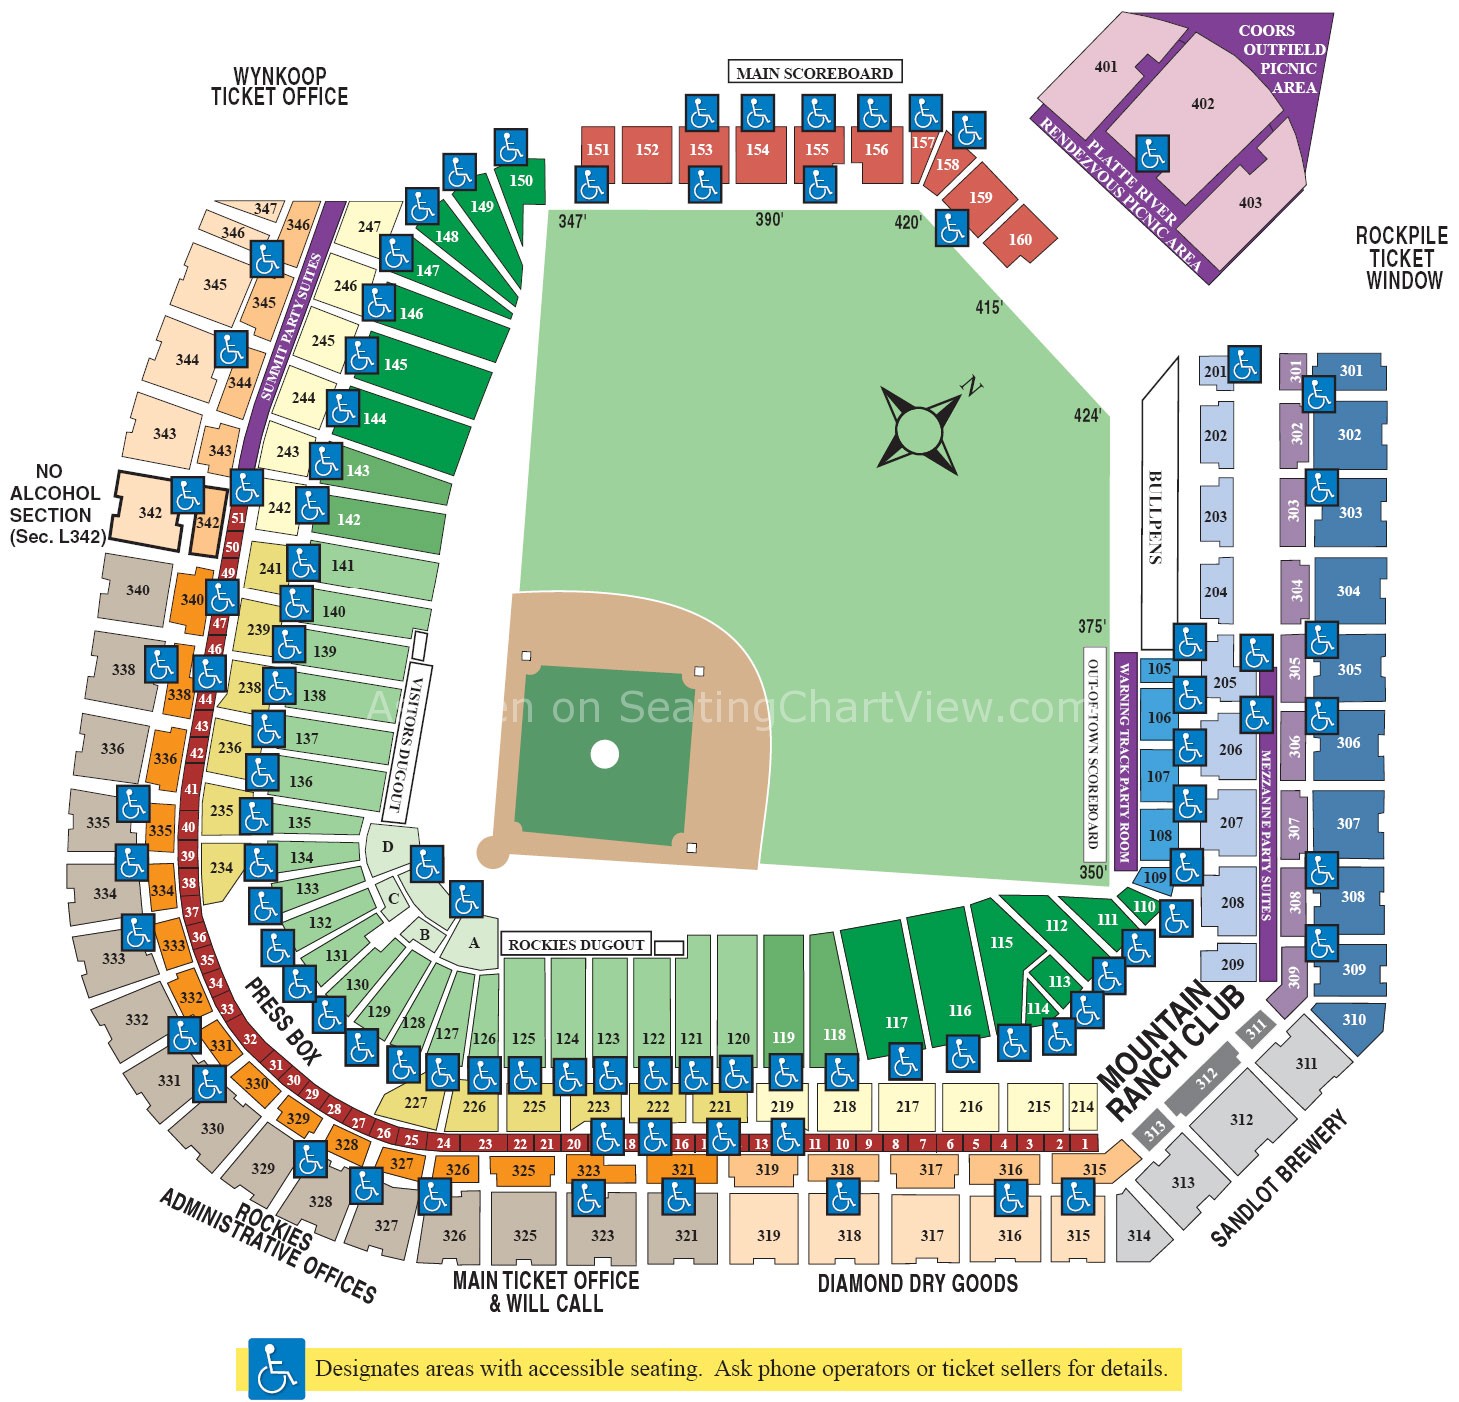 Coors Field, Denver CO - Seating Chart View